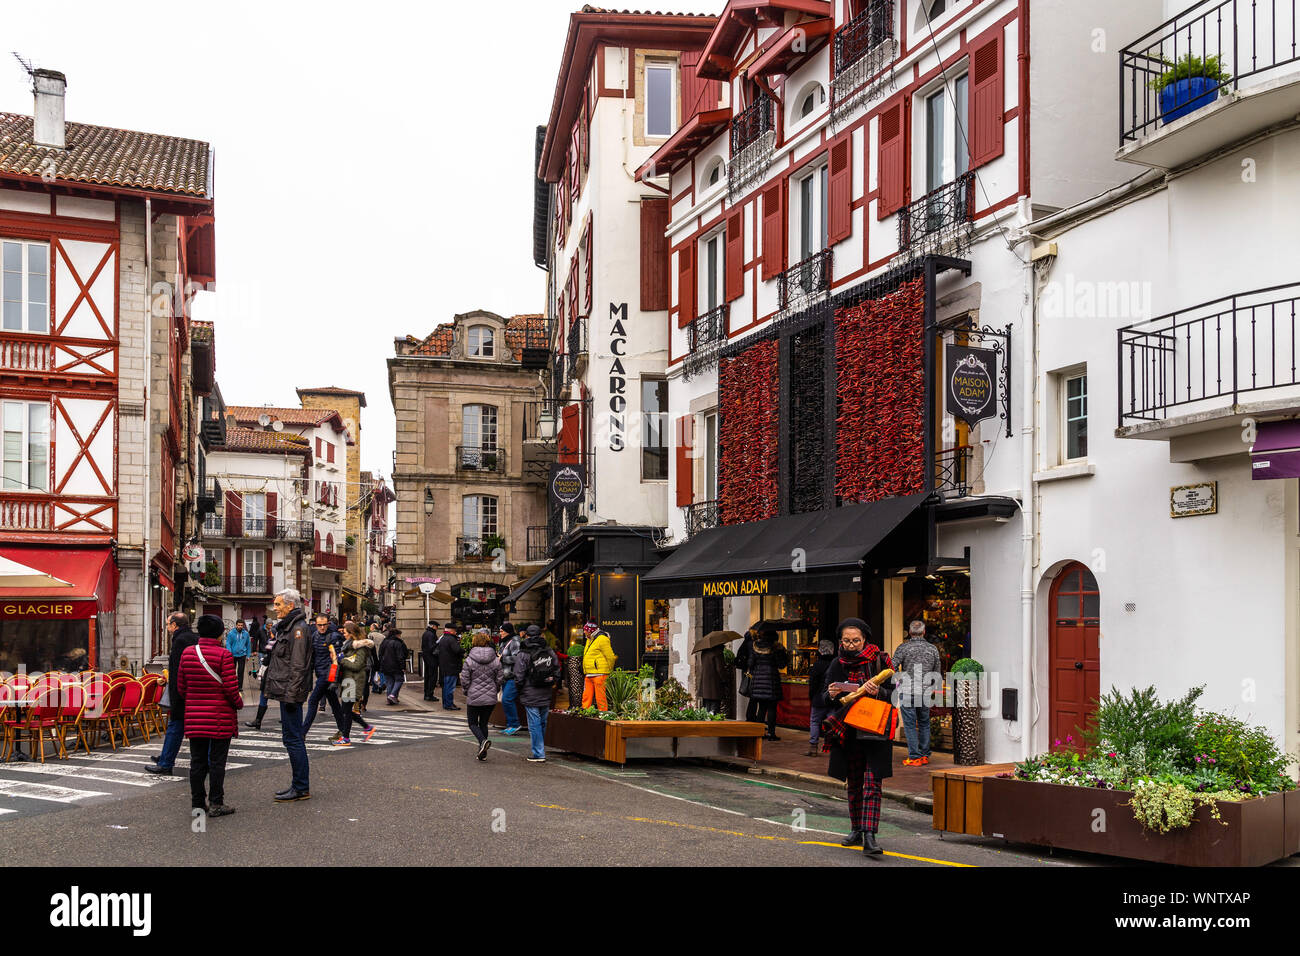 View of Saint Jean de Luz old town with typical half timbered houses. Saint  Jean de Luz, France, January 2019 Stock Photo - Alamy